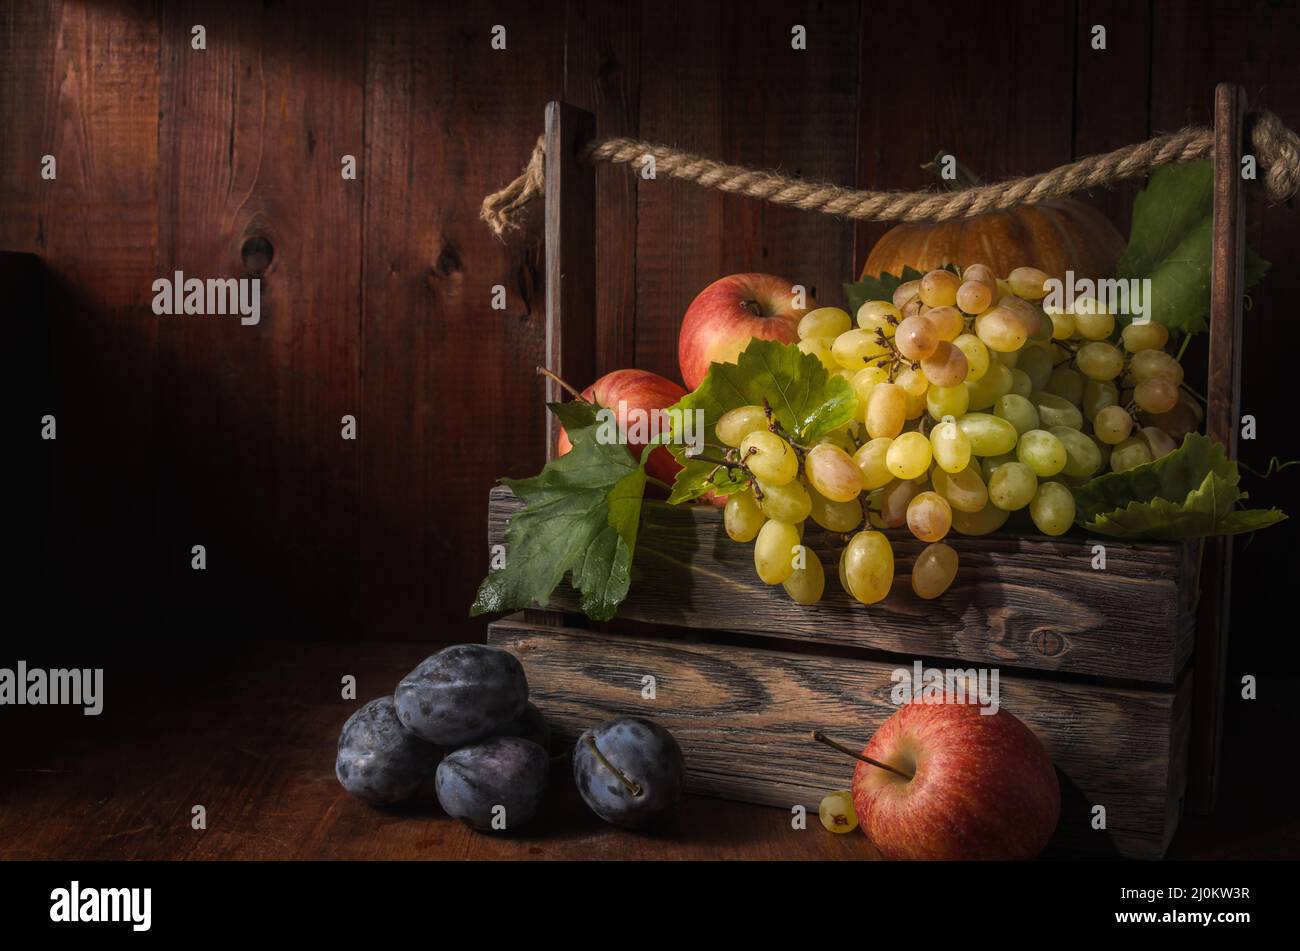 Grapes and other fruits on a dark wooden background in a rustic style Stock Photo